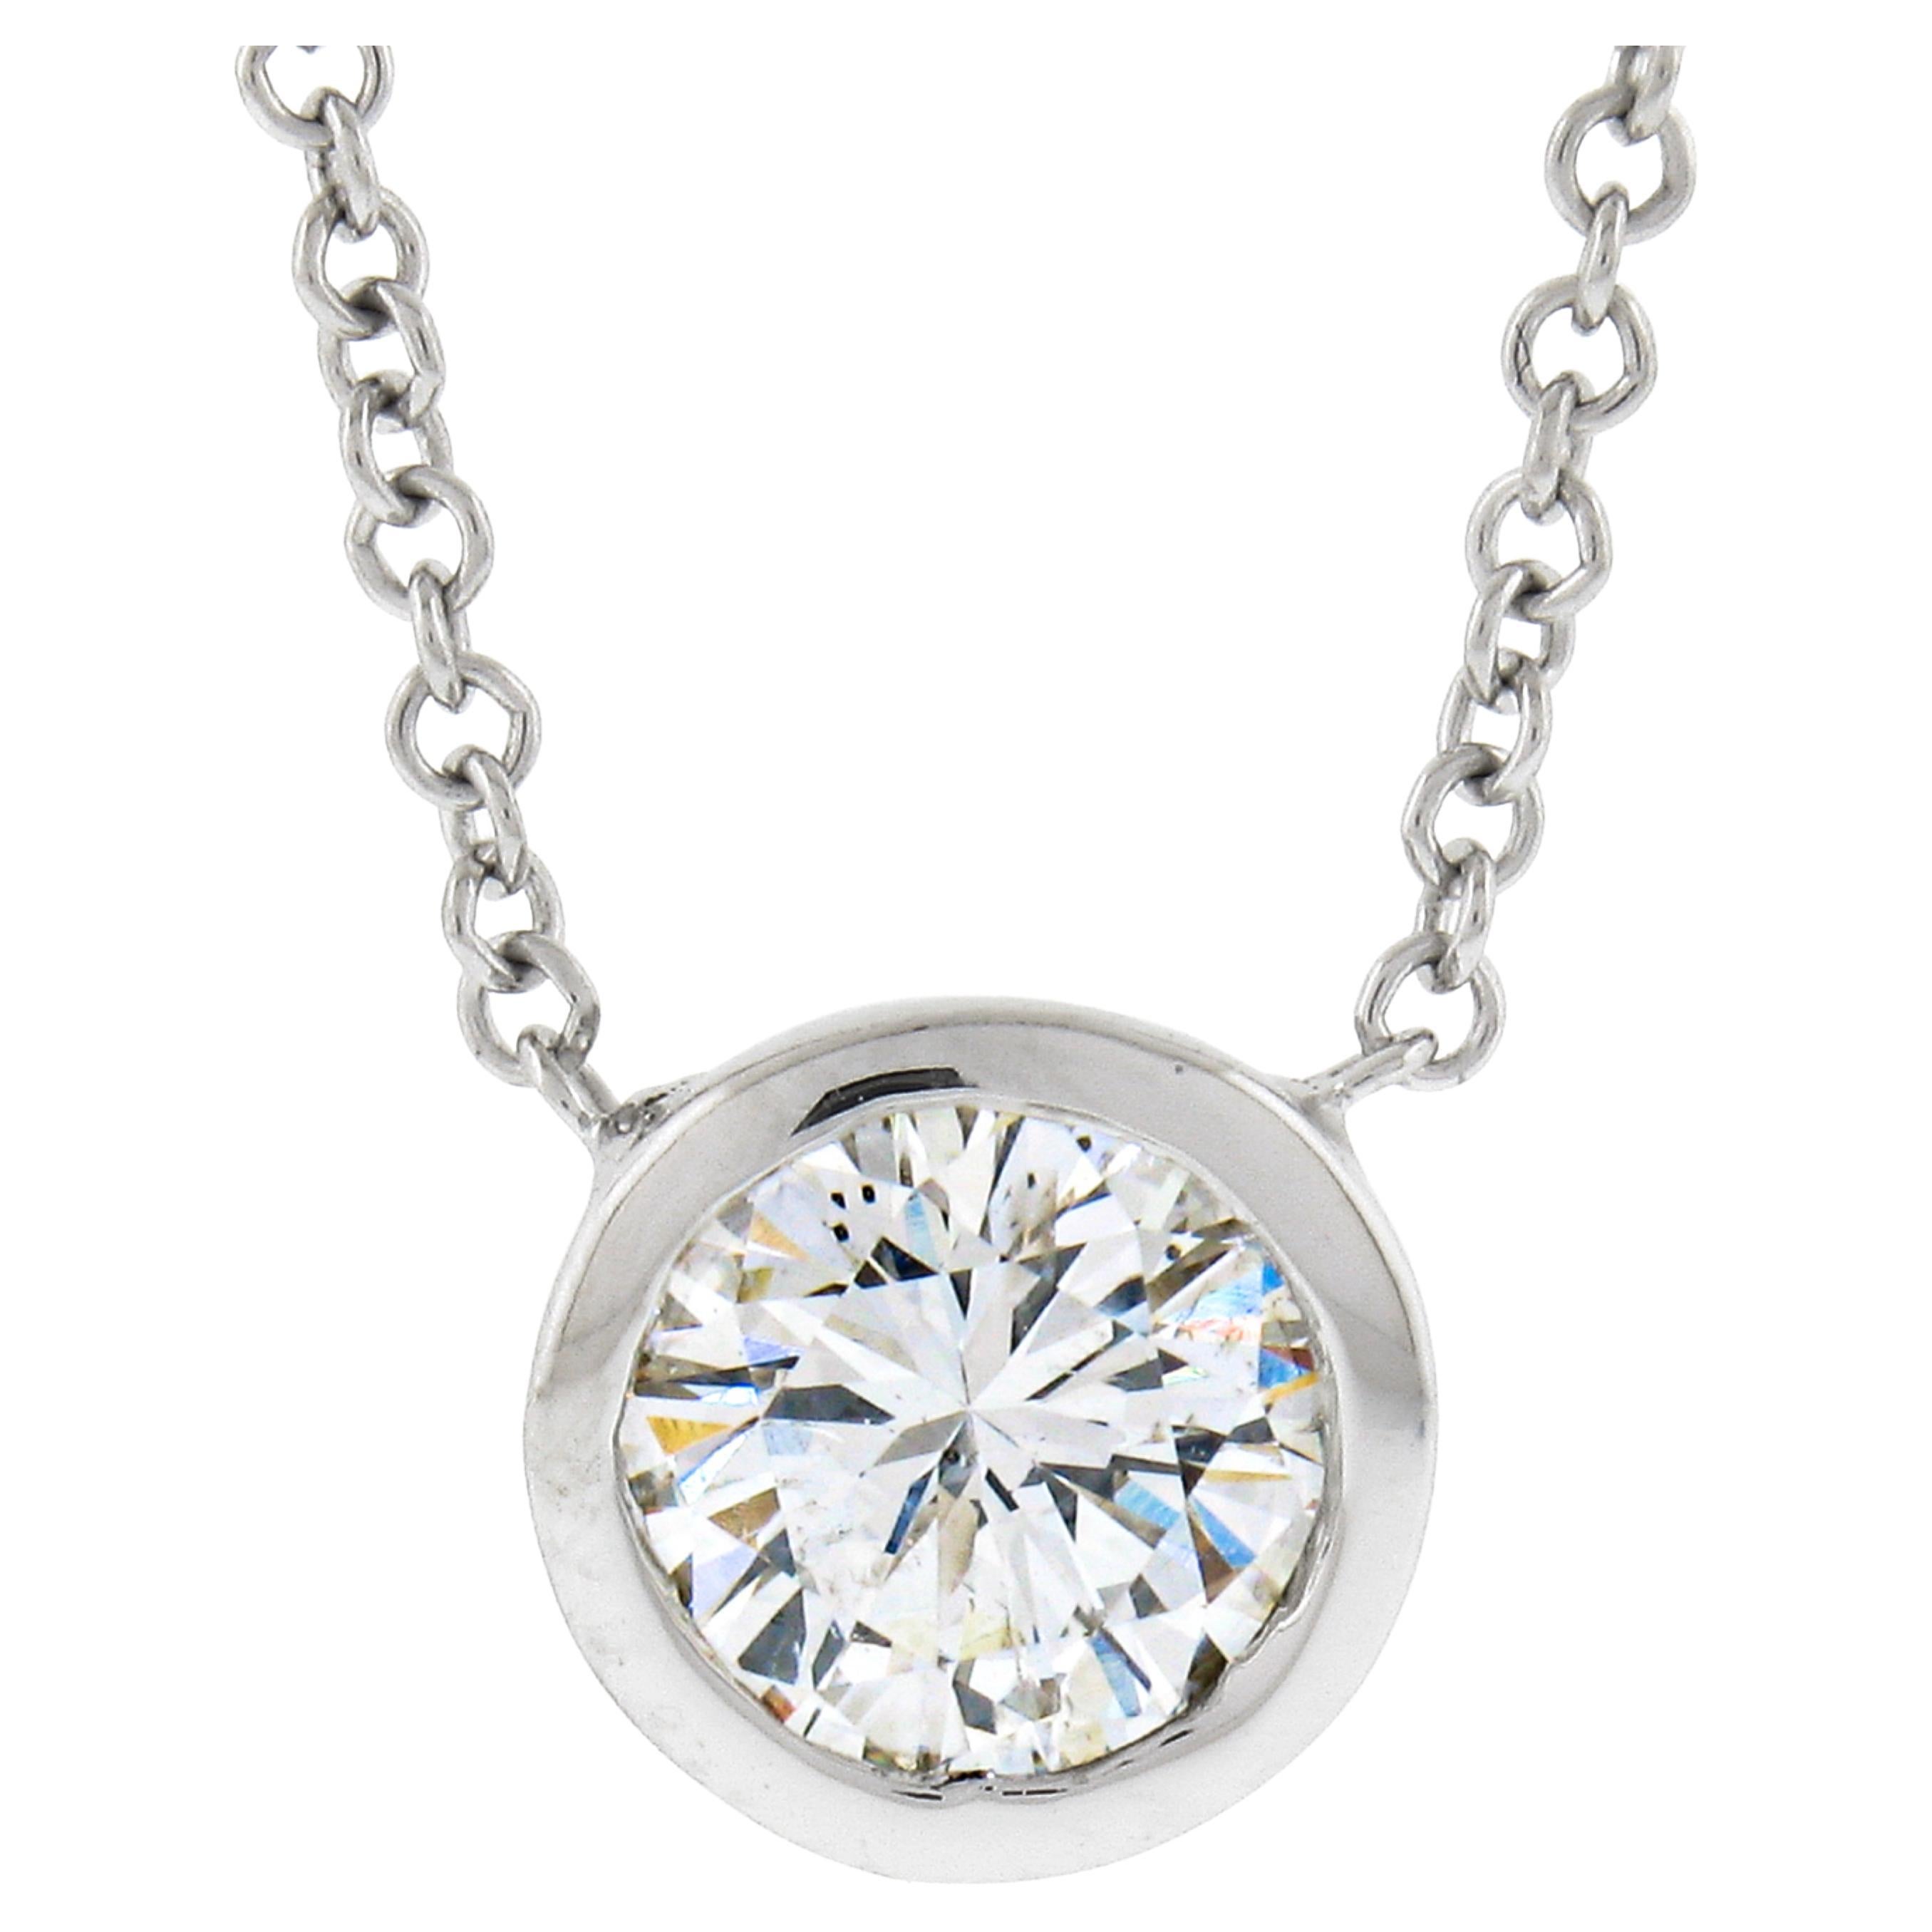 NEW 14k White Gold 0.55ct Round Bezel Diamond Solitaire Pendant Adjustable Chain For Sale